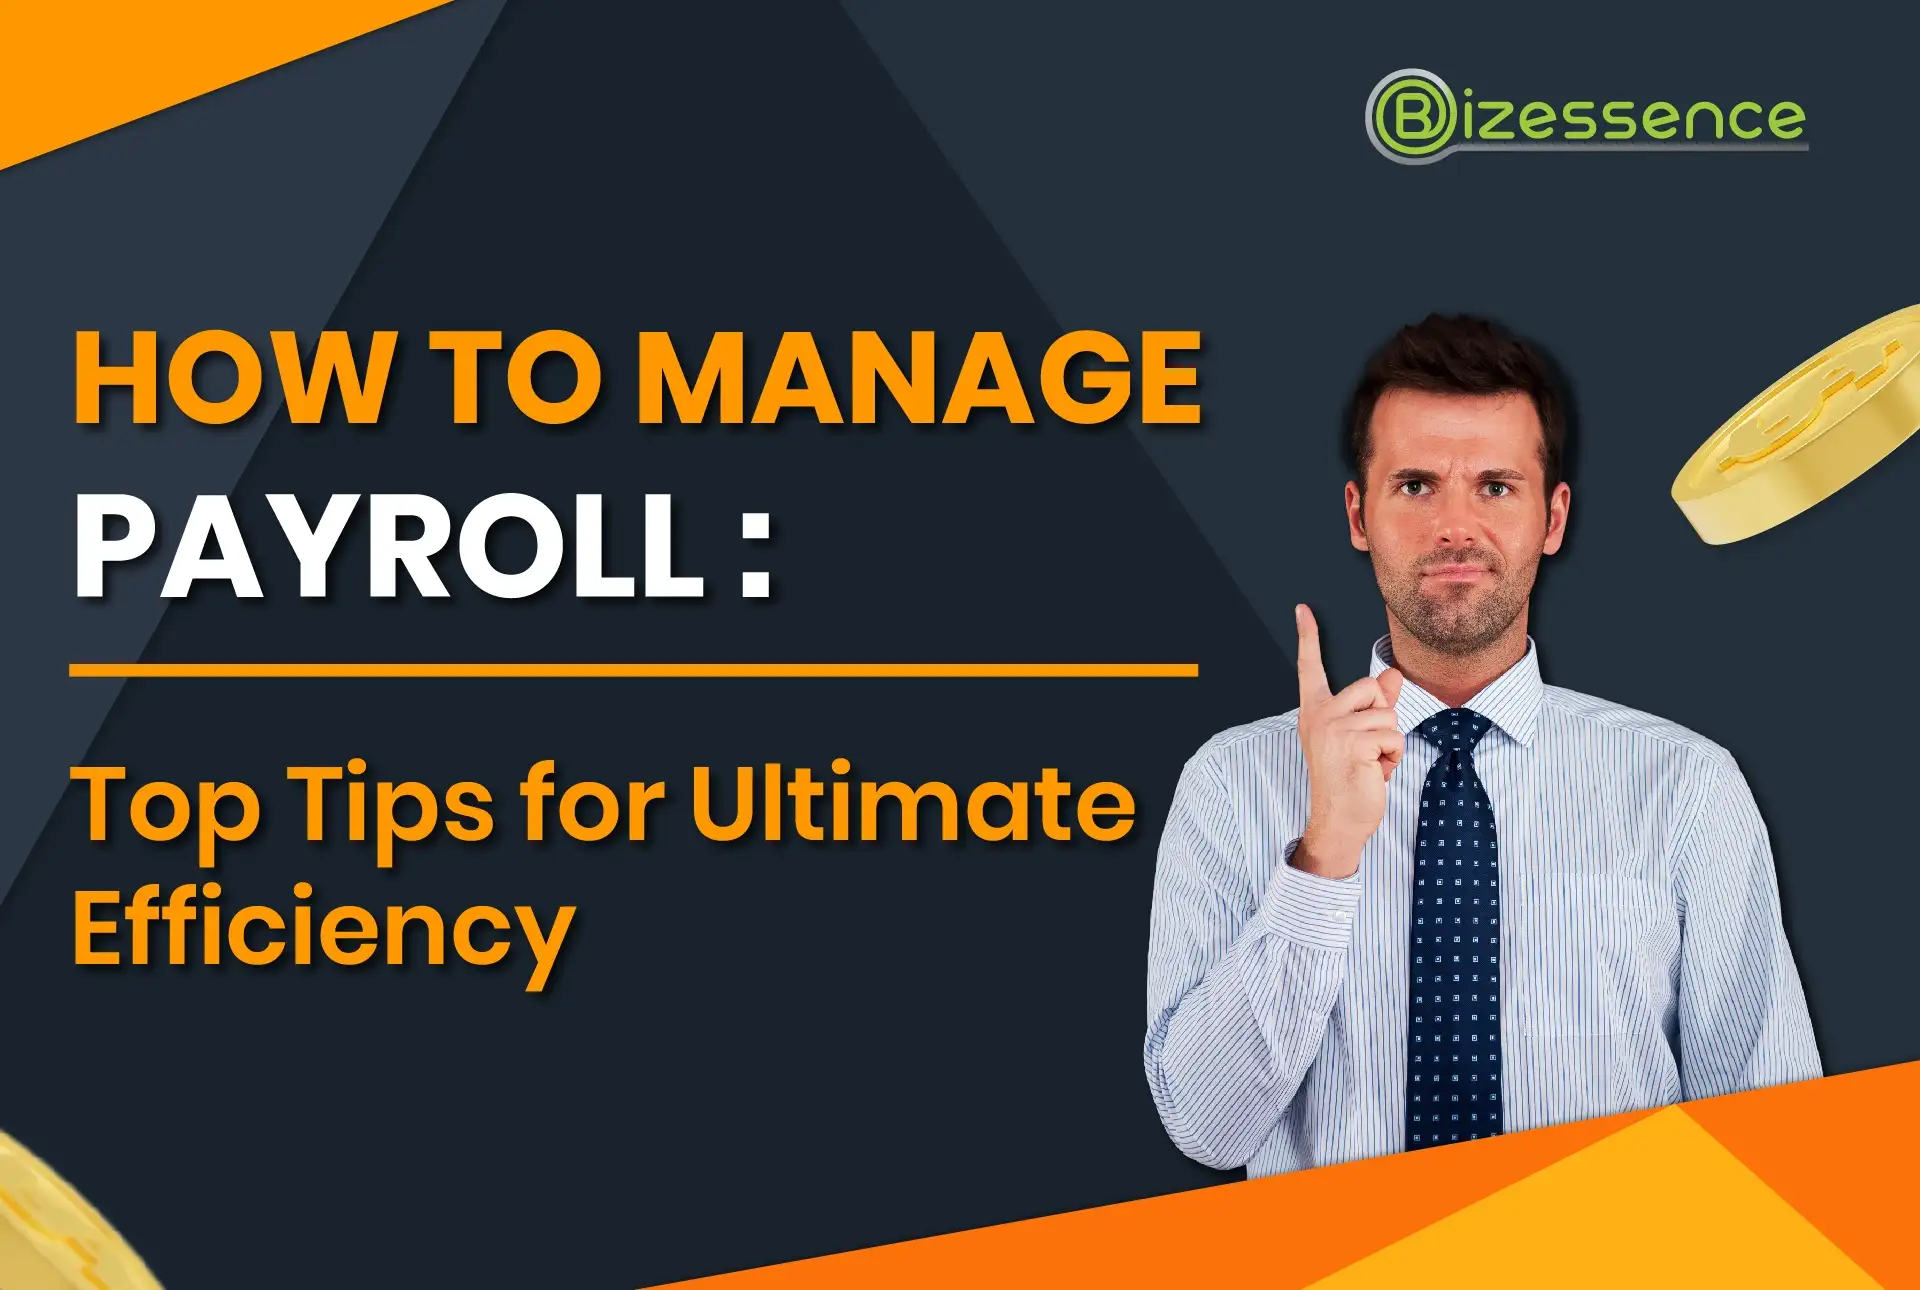 How to Manage Payroll Top Tips for Ultimate Efficiency